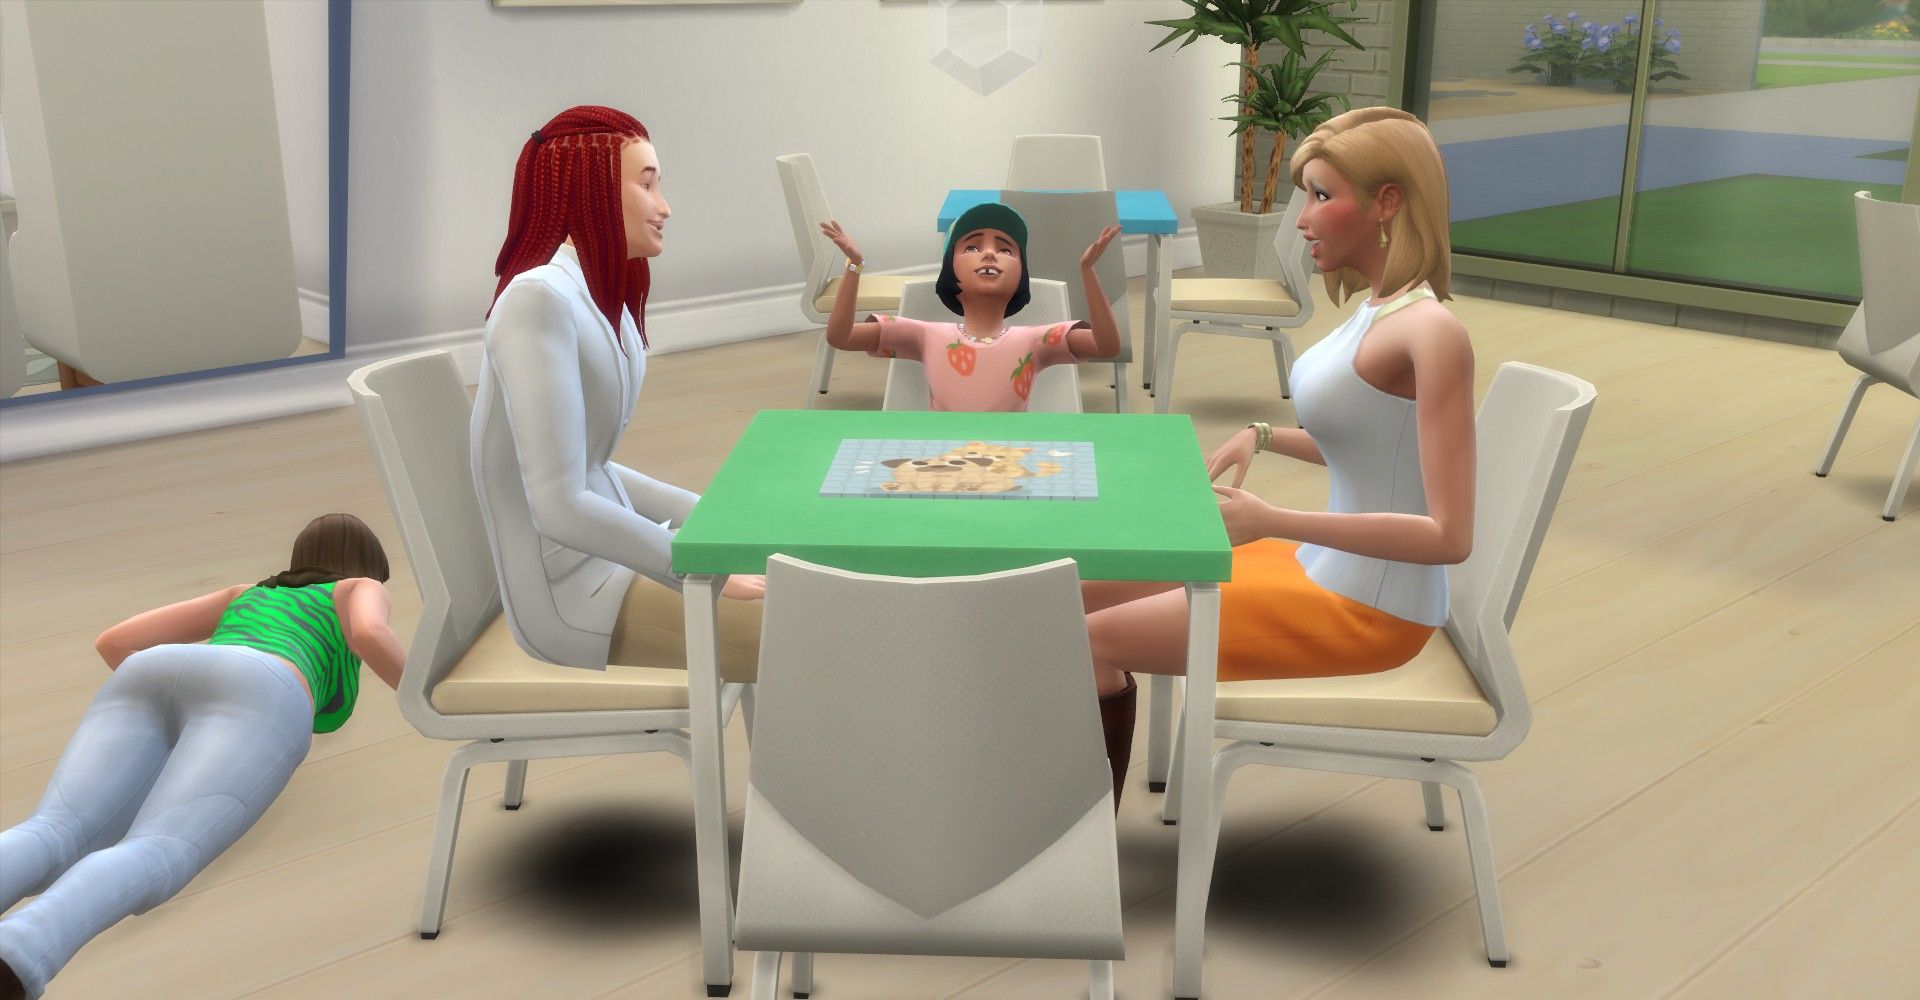 Sims 4 Growing Together game table showing three Sims sitting around a completed puzzle.